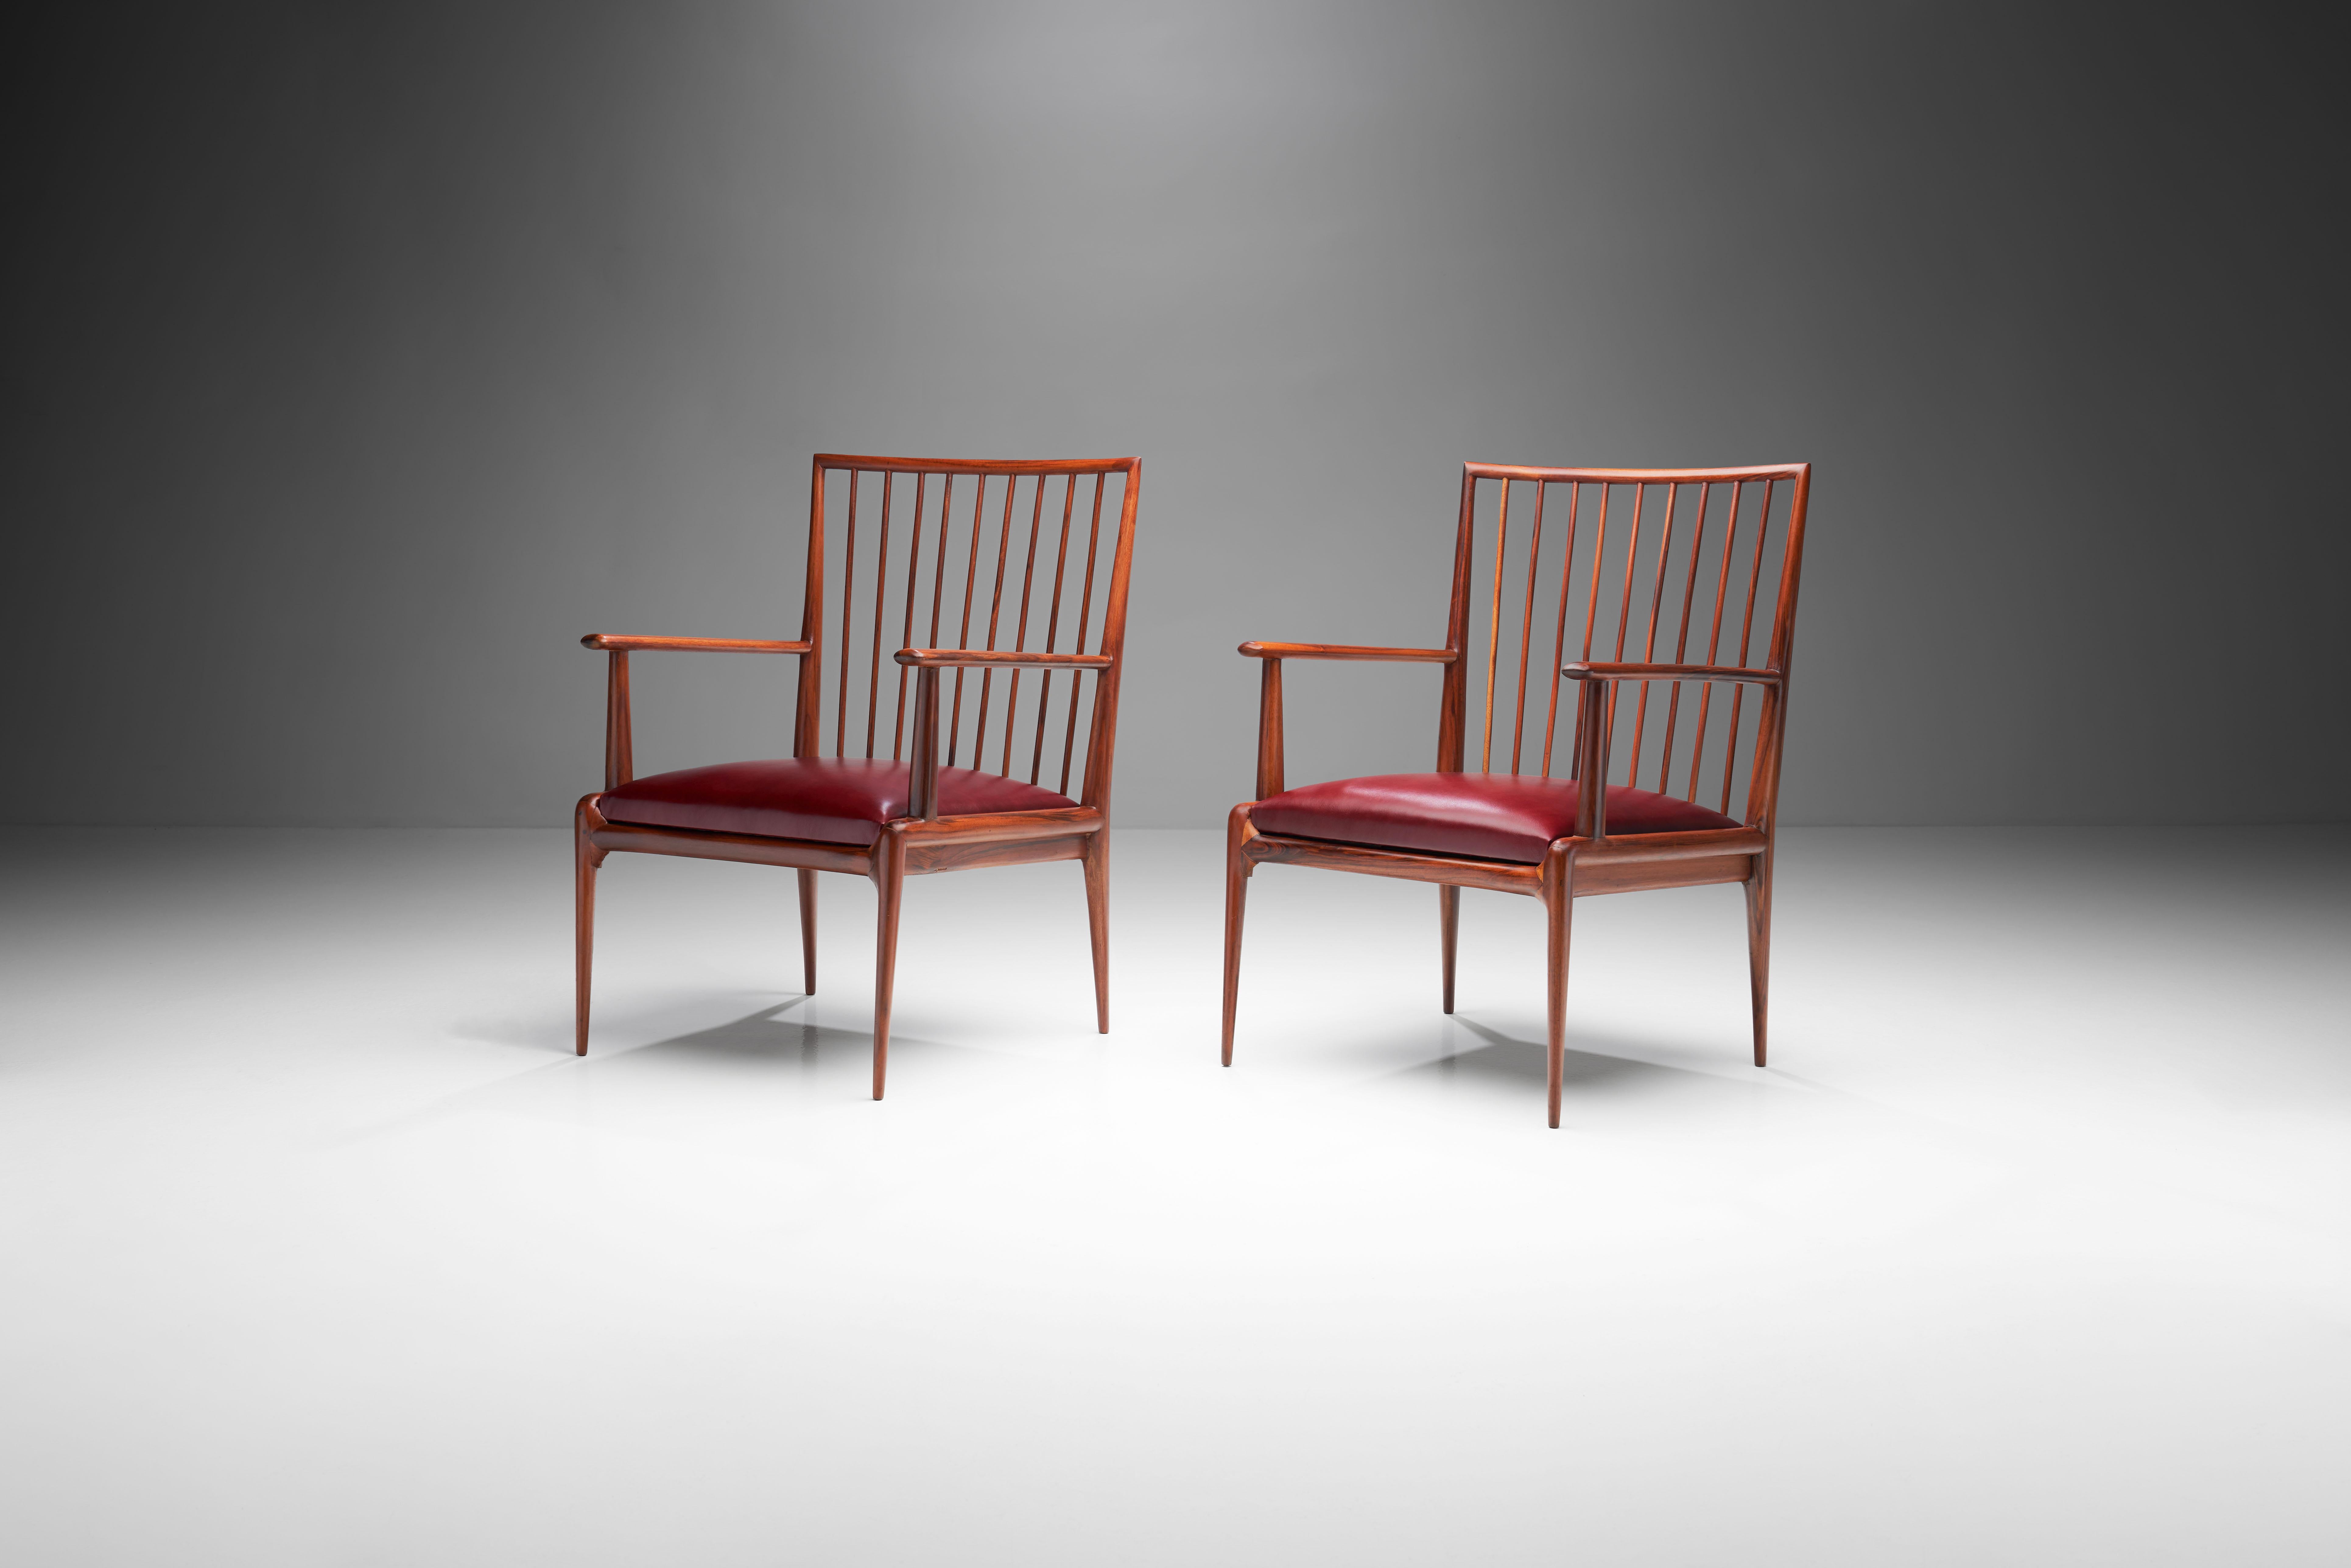 20th Century Pair of Mid-Century Chairs by Branco & Preto 'Attr.', Brazil, 1950s For Sale